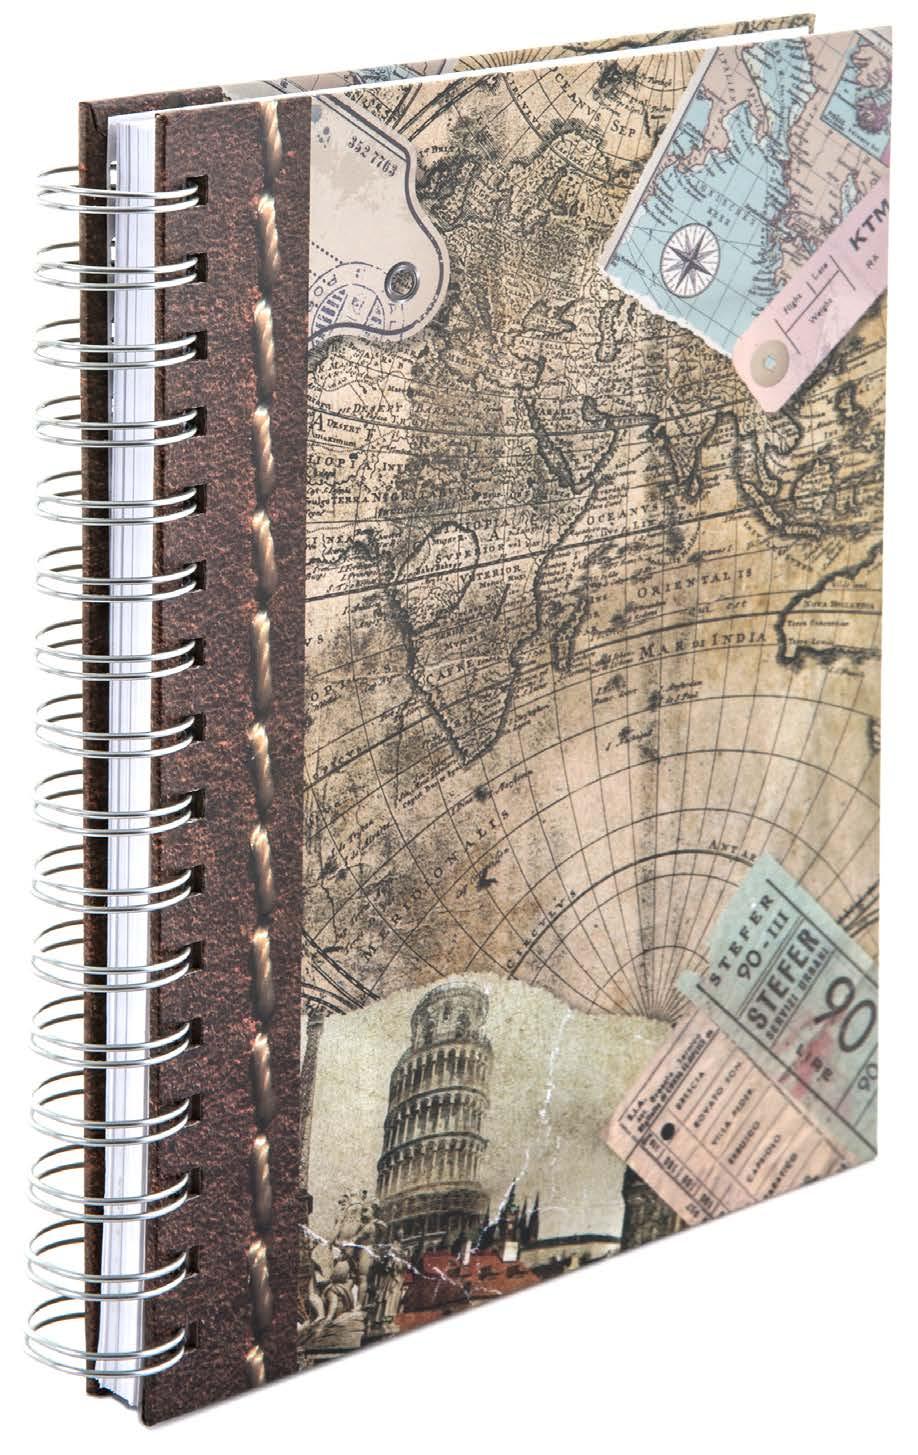 destination. The front cover features a world map design with aeroplane symbols and flight paths picked out in glossy red and black.